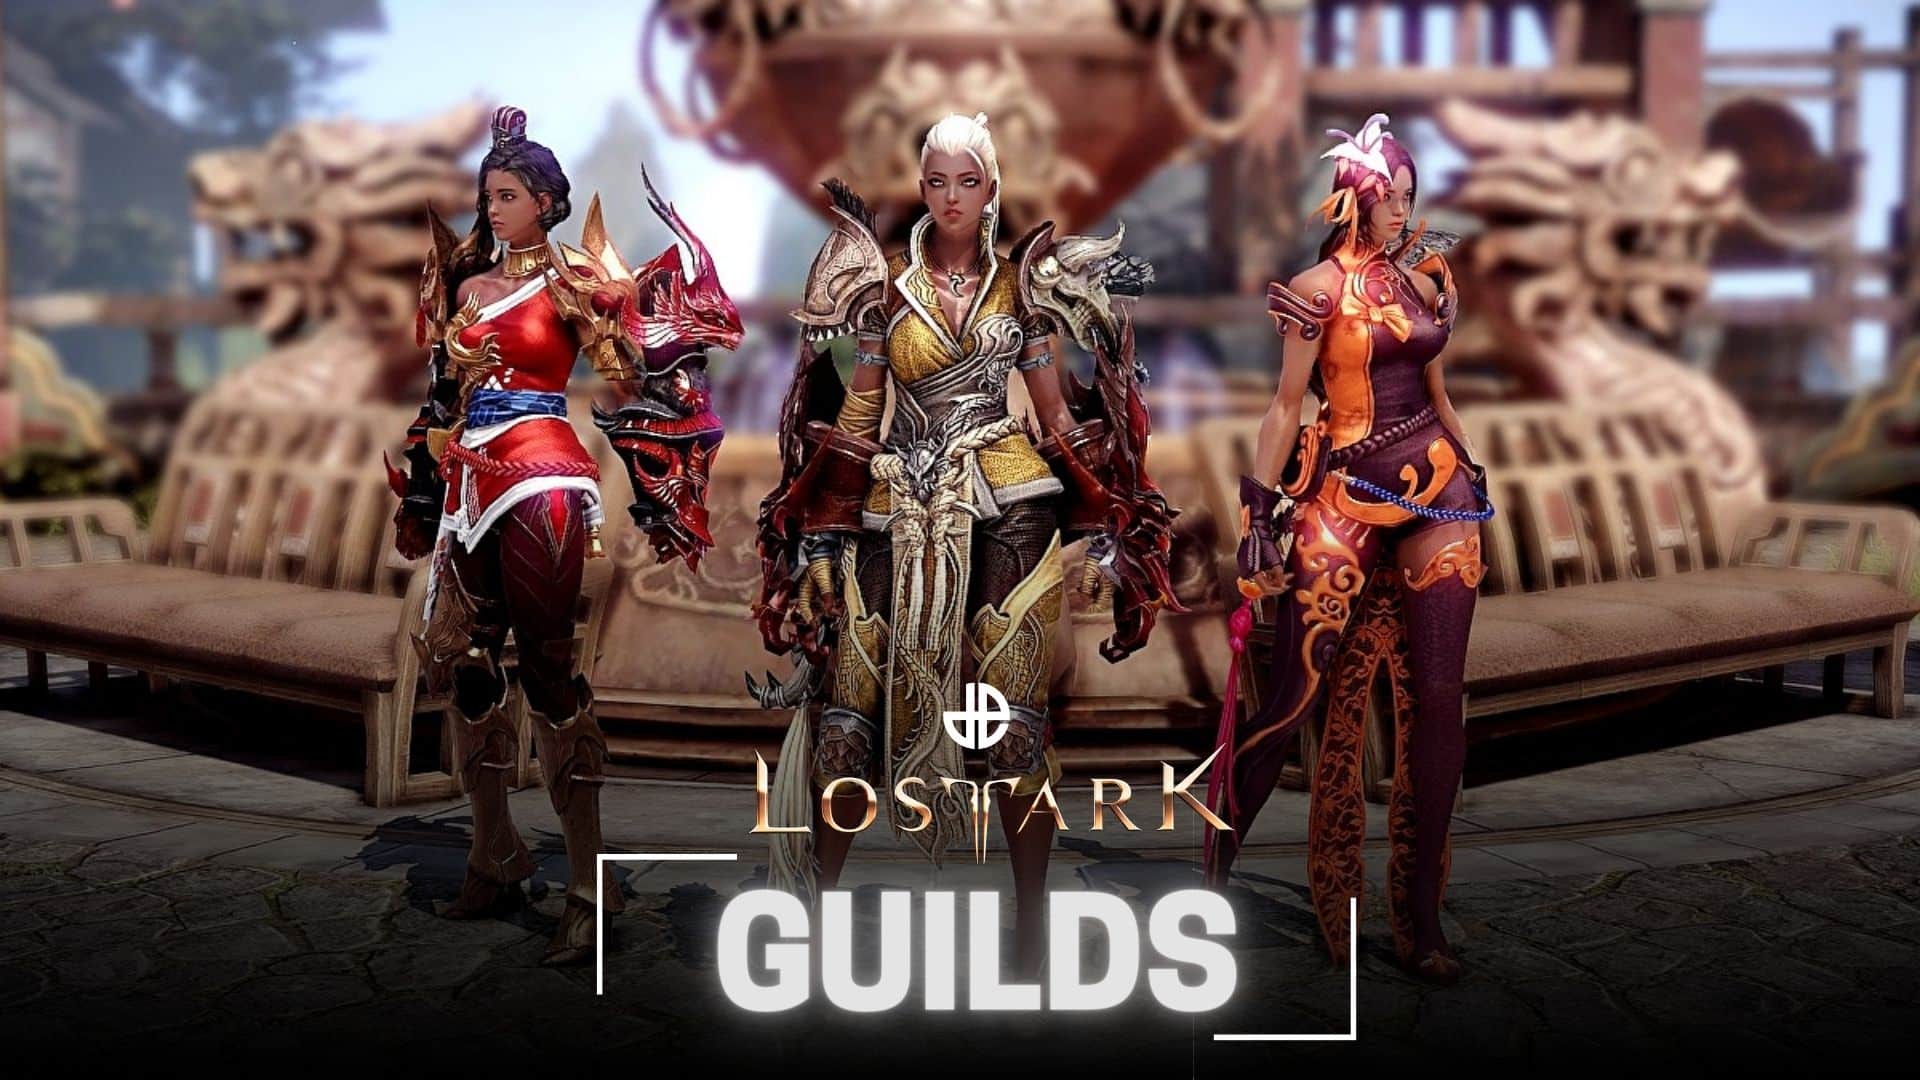 Guilds Lost Ark